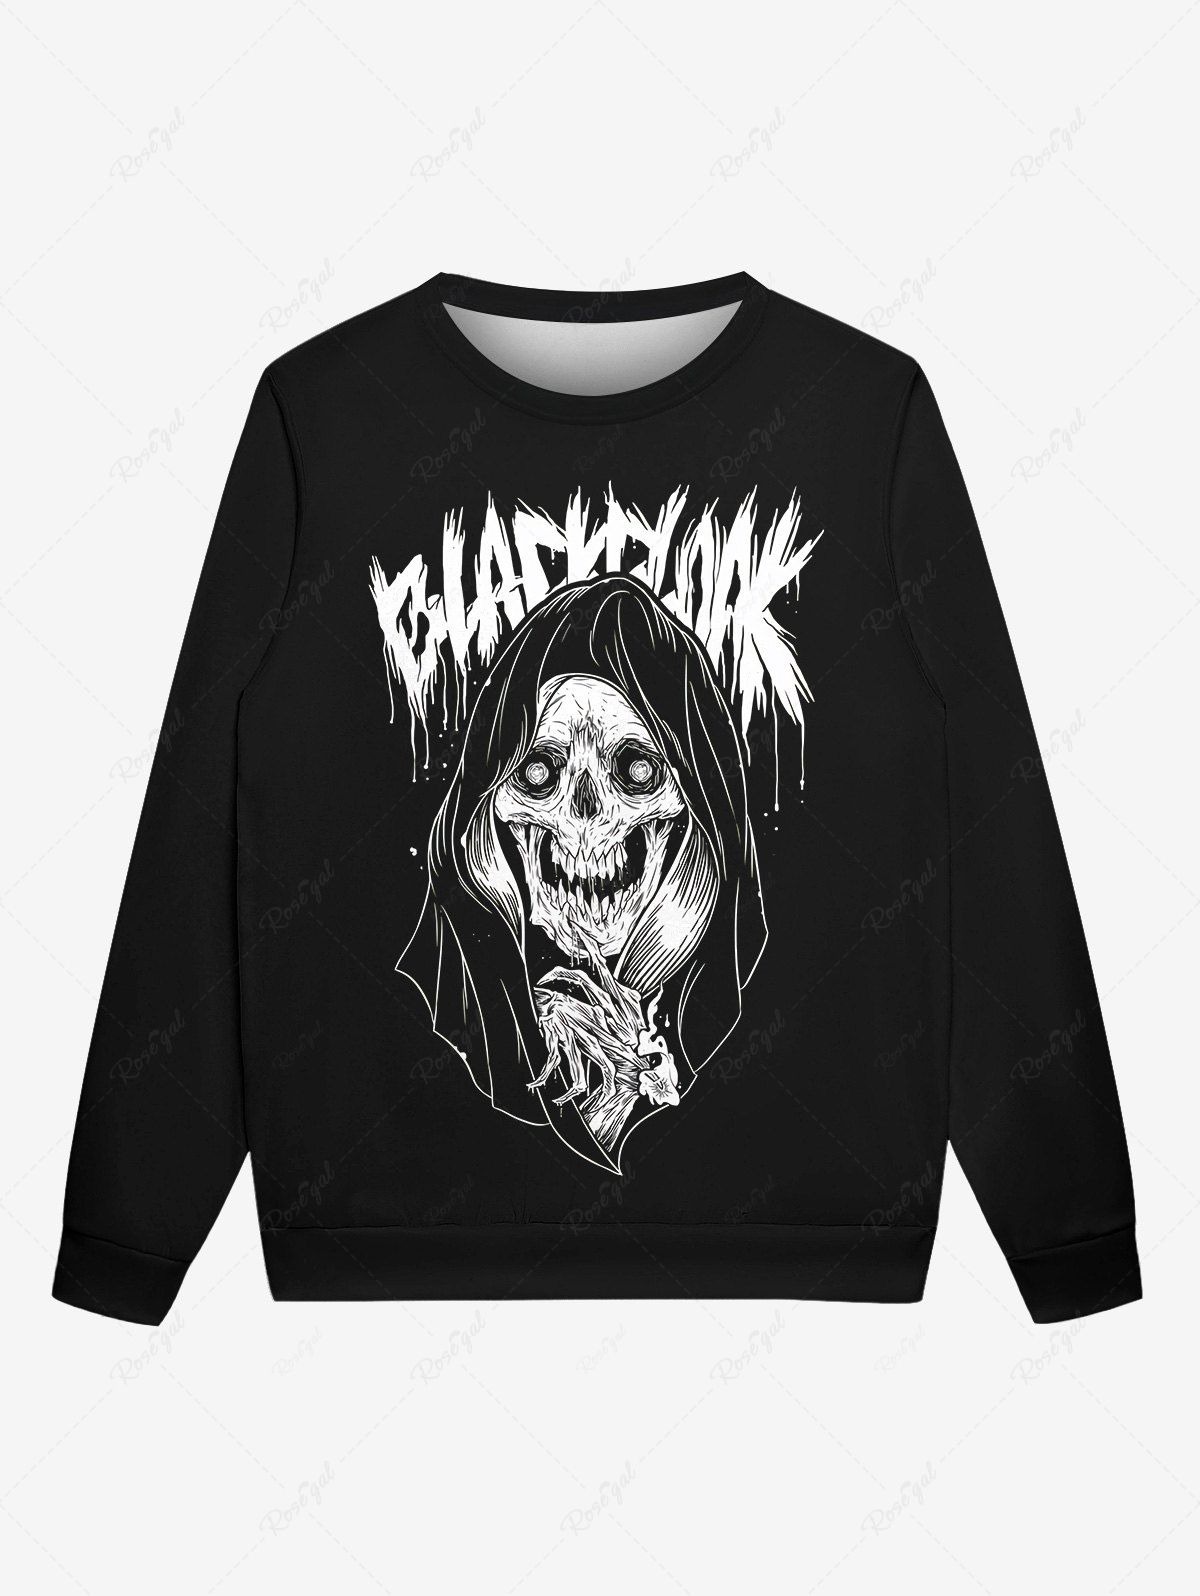 Fashion Gothic Skull Wizard Letters Print Pullover Long Sleeves Sweatshirt For Men  